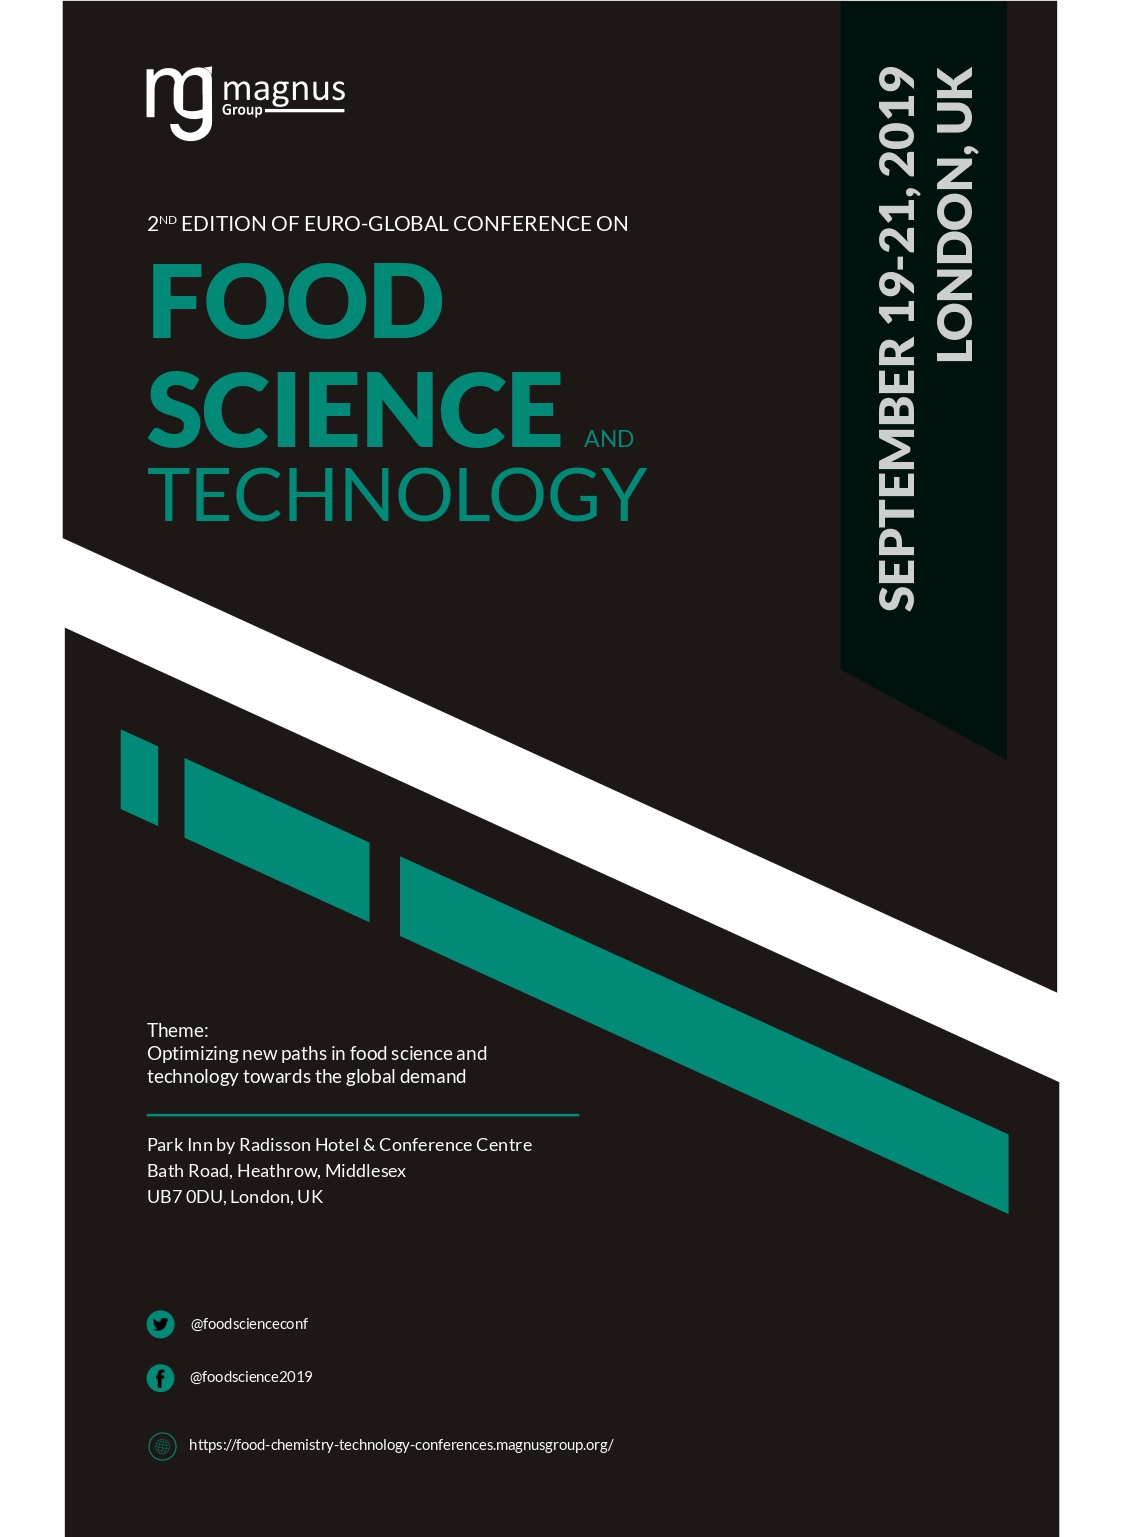 2nd Edition of Euro-Global Conference on Food Science and Technology Book